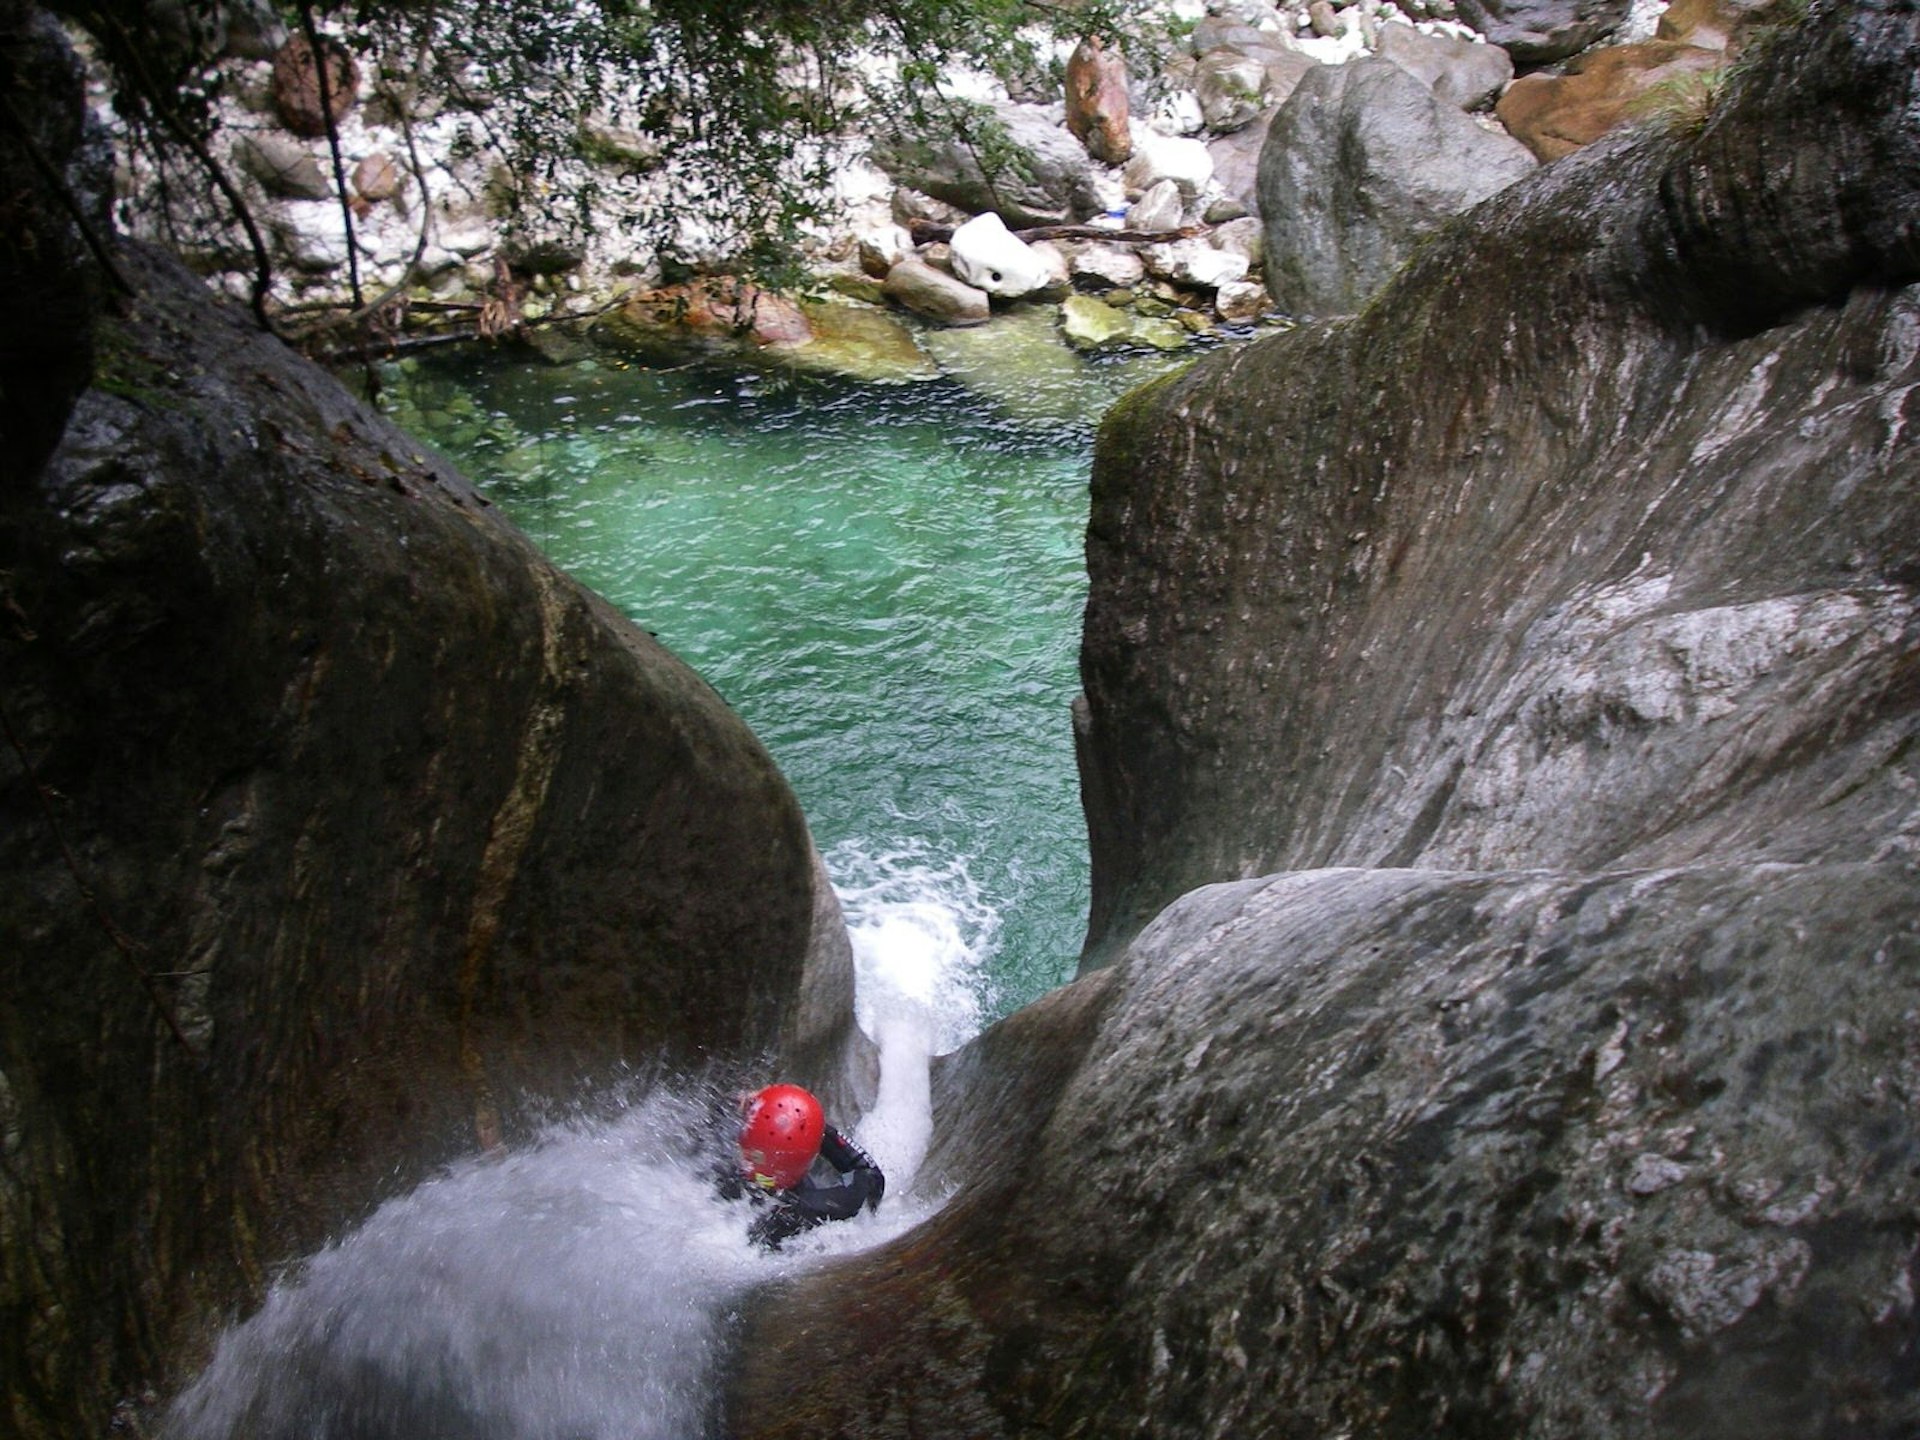 A red-helmeted canyoner slides down a steep water chute © Toscana Adventure Team